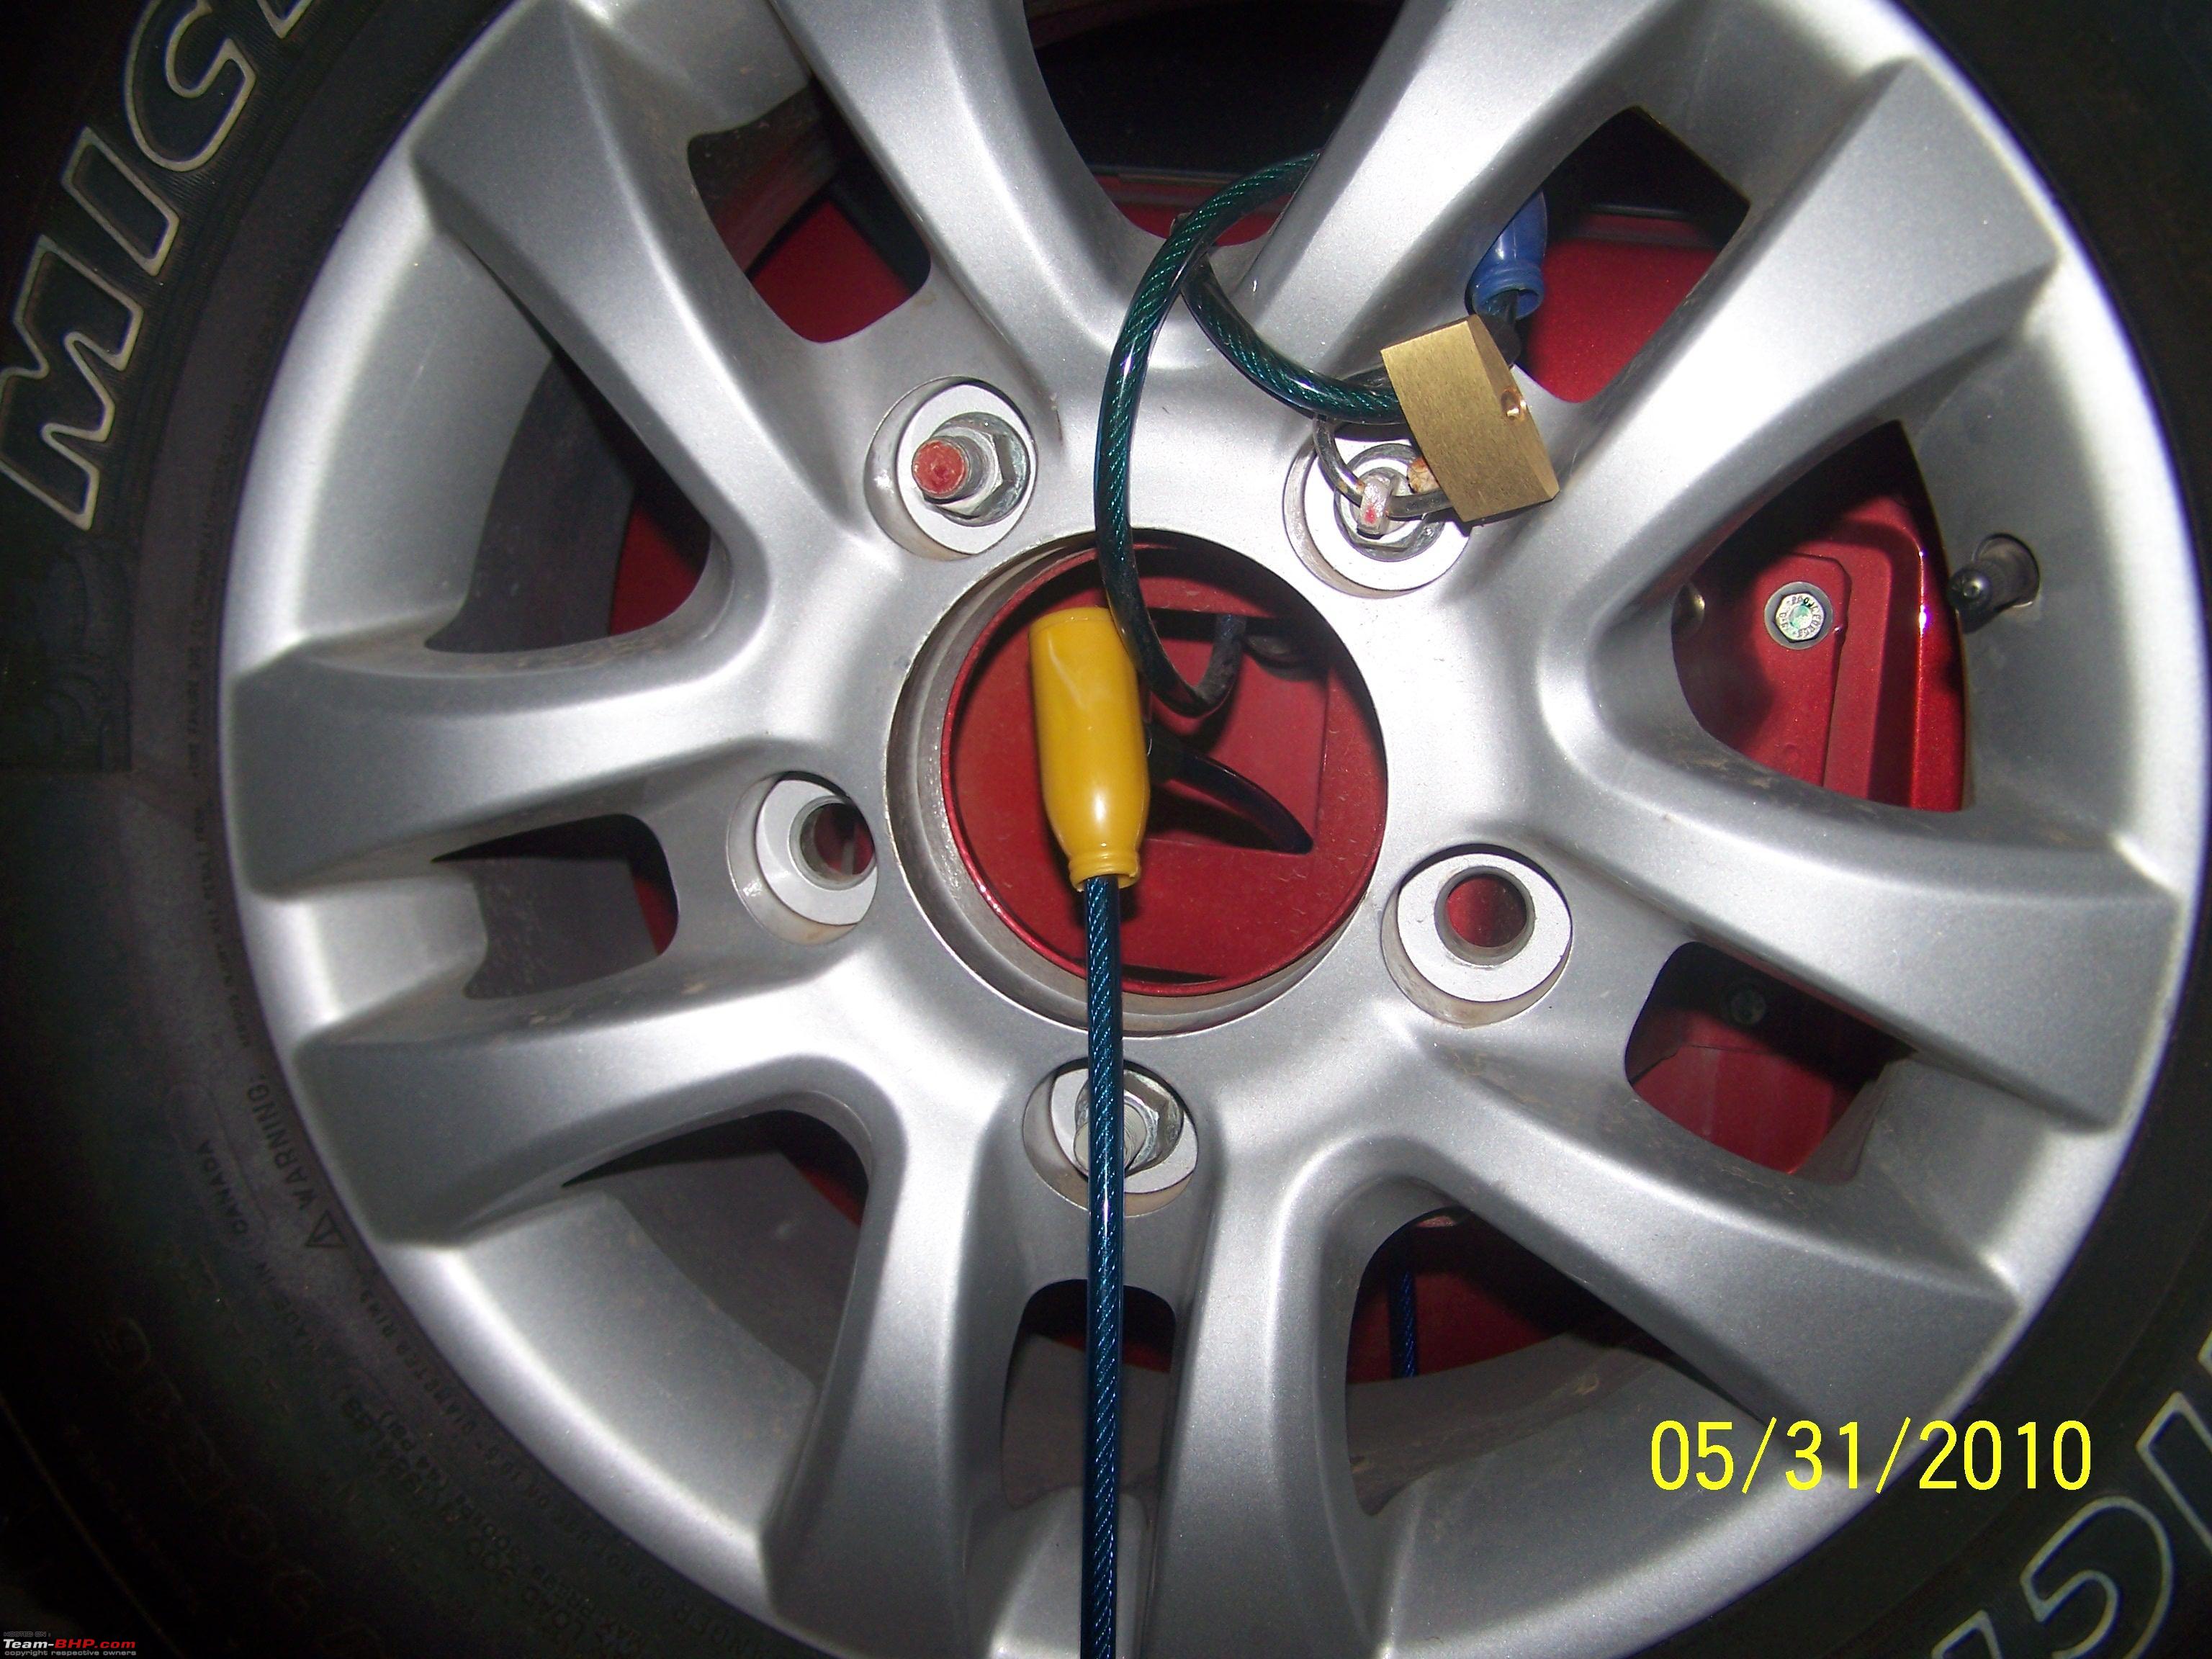 DIY : How to secure a Tata Safari Spare wheel cover from theft-100_5453.